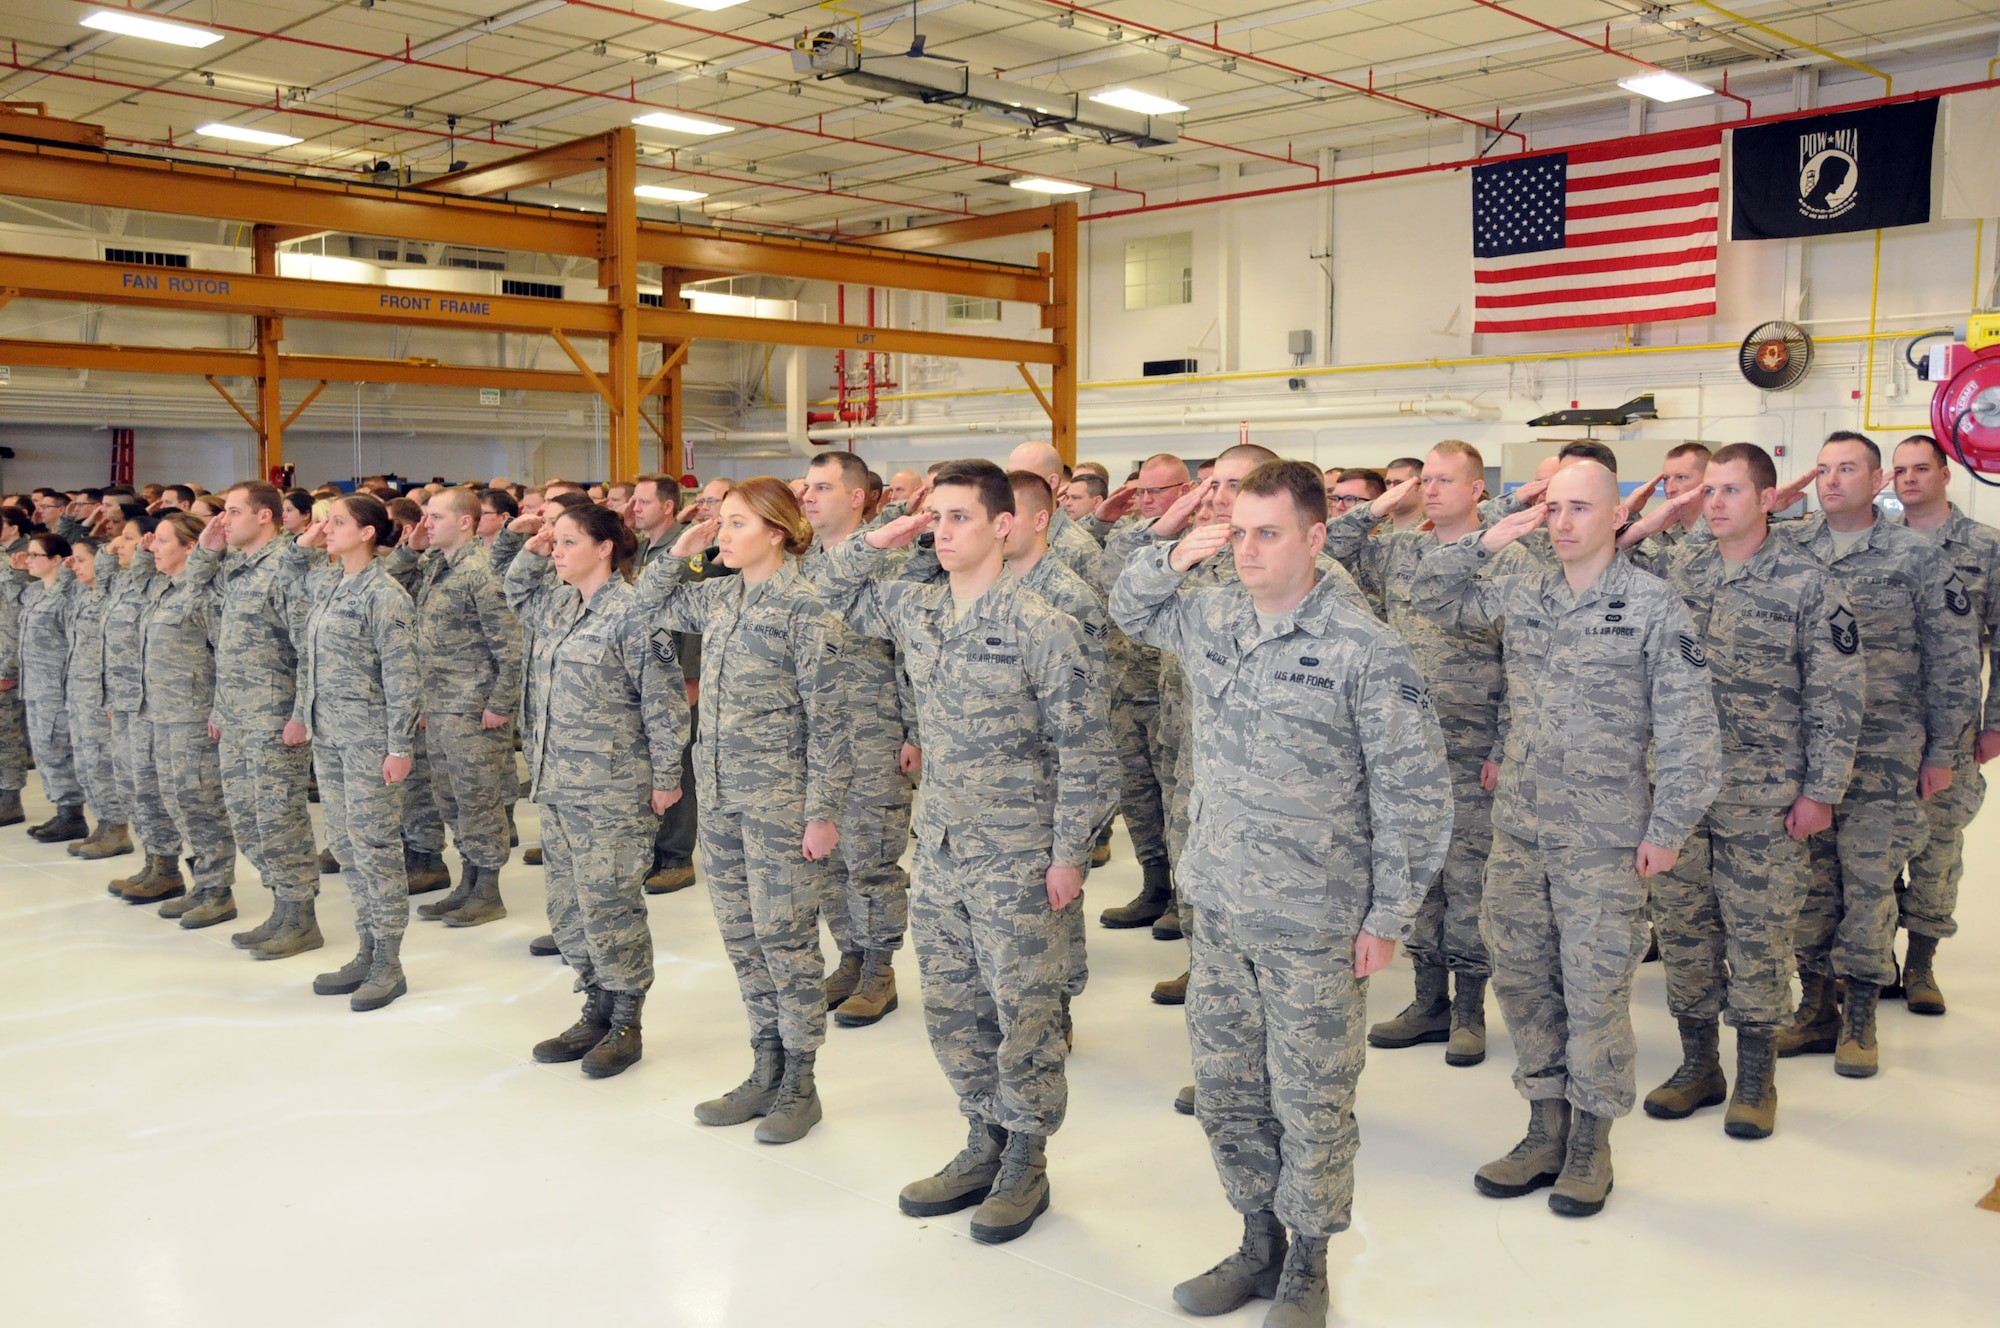 Members of the 183rd Air Operations Group salutes during activation ceremony Jan. 10, 2015 in Springfield, Illinois.  The Illinois Air National Guard unit is responsible for command and control missions in combat theaters around the world.  (U.S.  Air National Guard photo by Master Sgt. Shaun Kerr/Released)